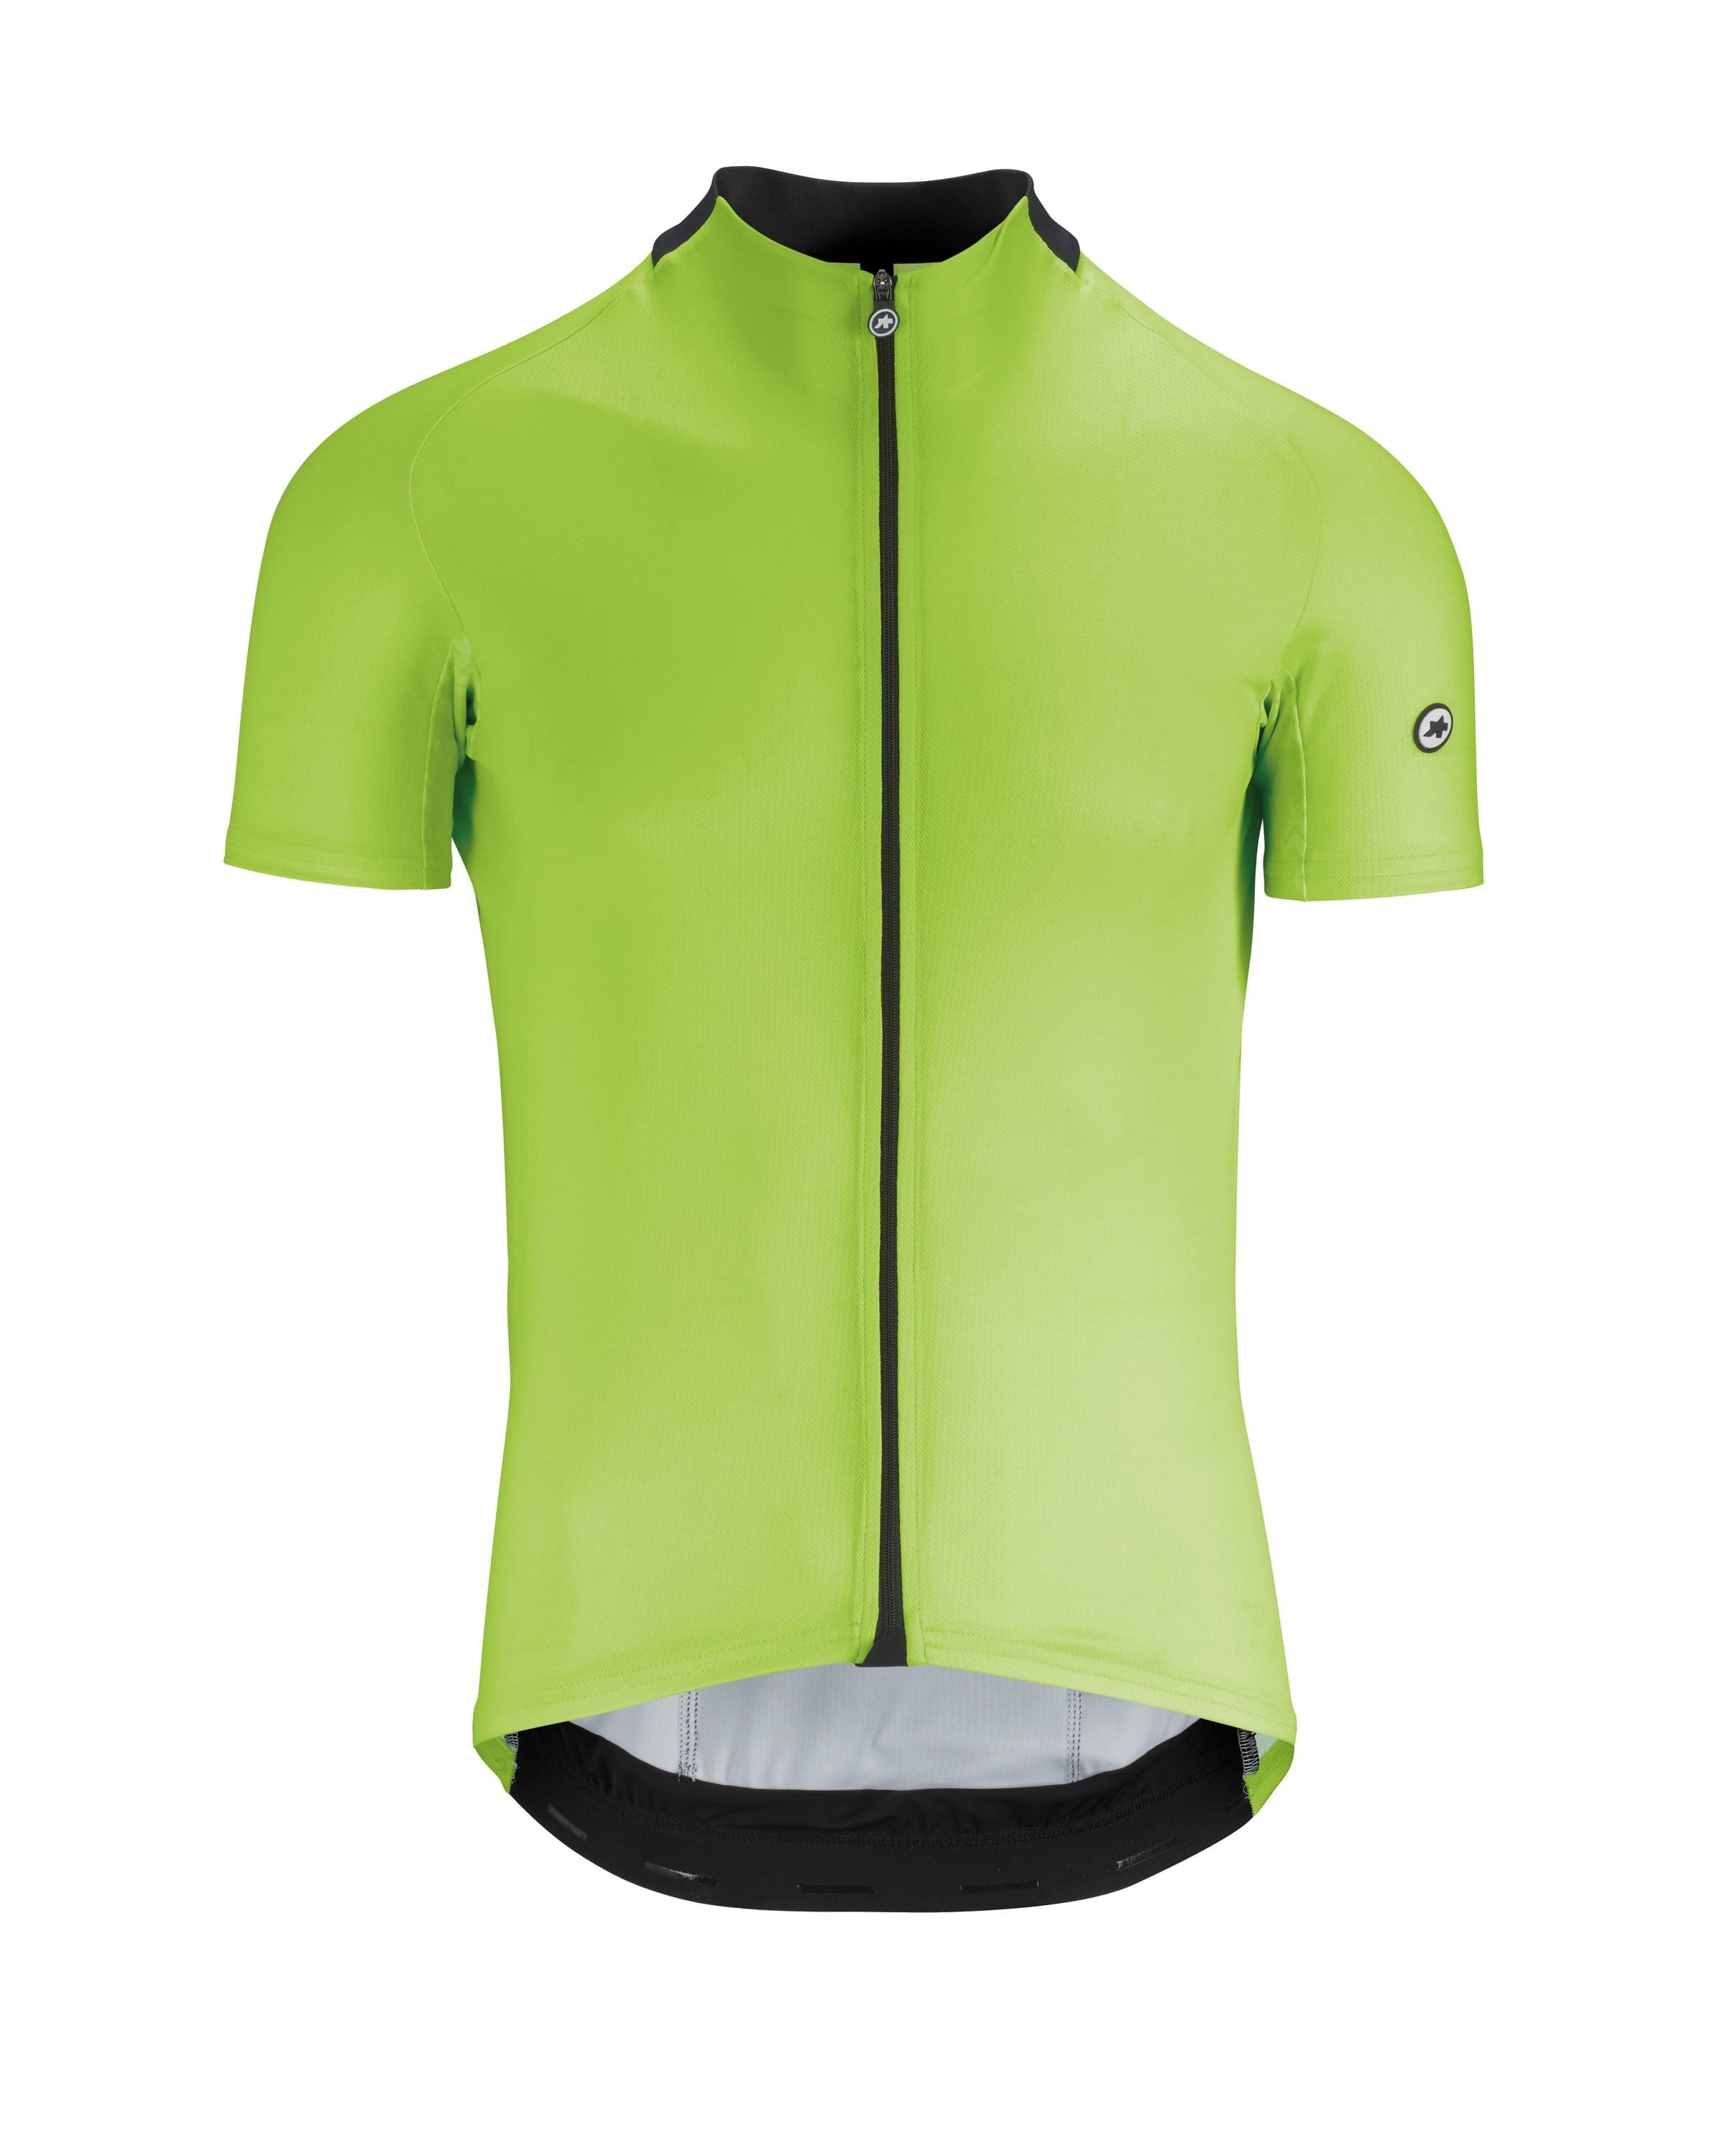 Assos Mille GT Short Sleeve Jersey - Maillot ciclismo - Hombre